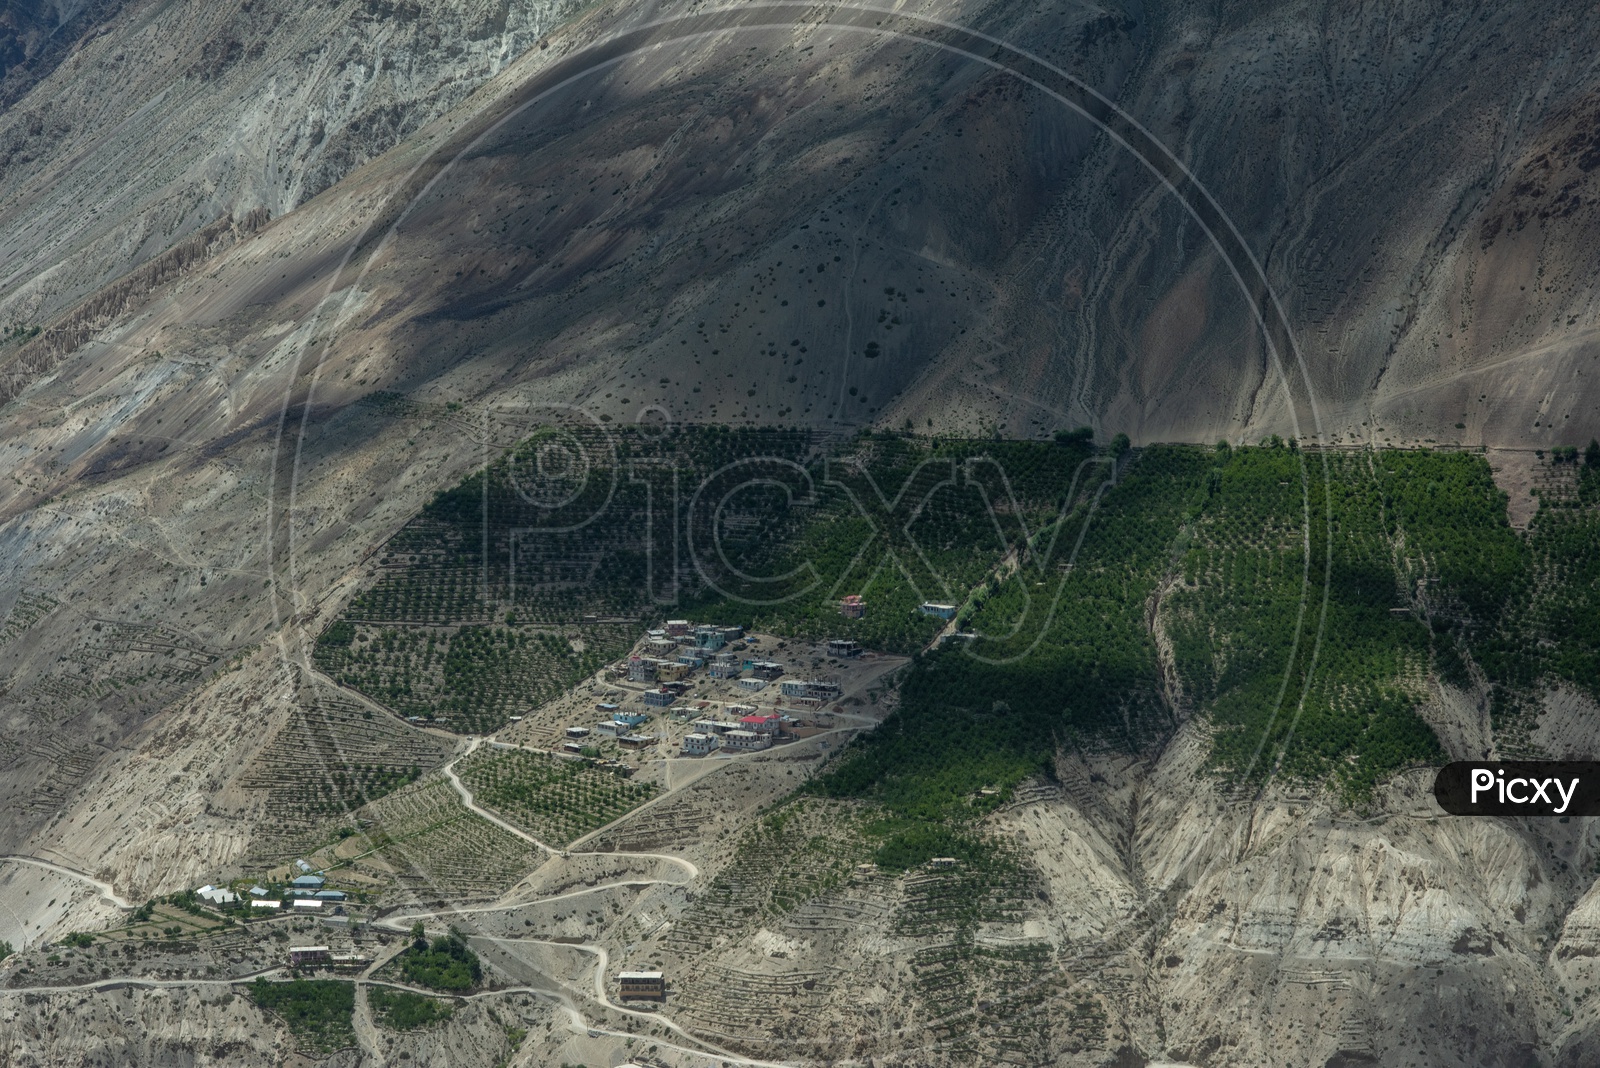 Mountains of Spiti Valley with agriculture fields